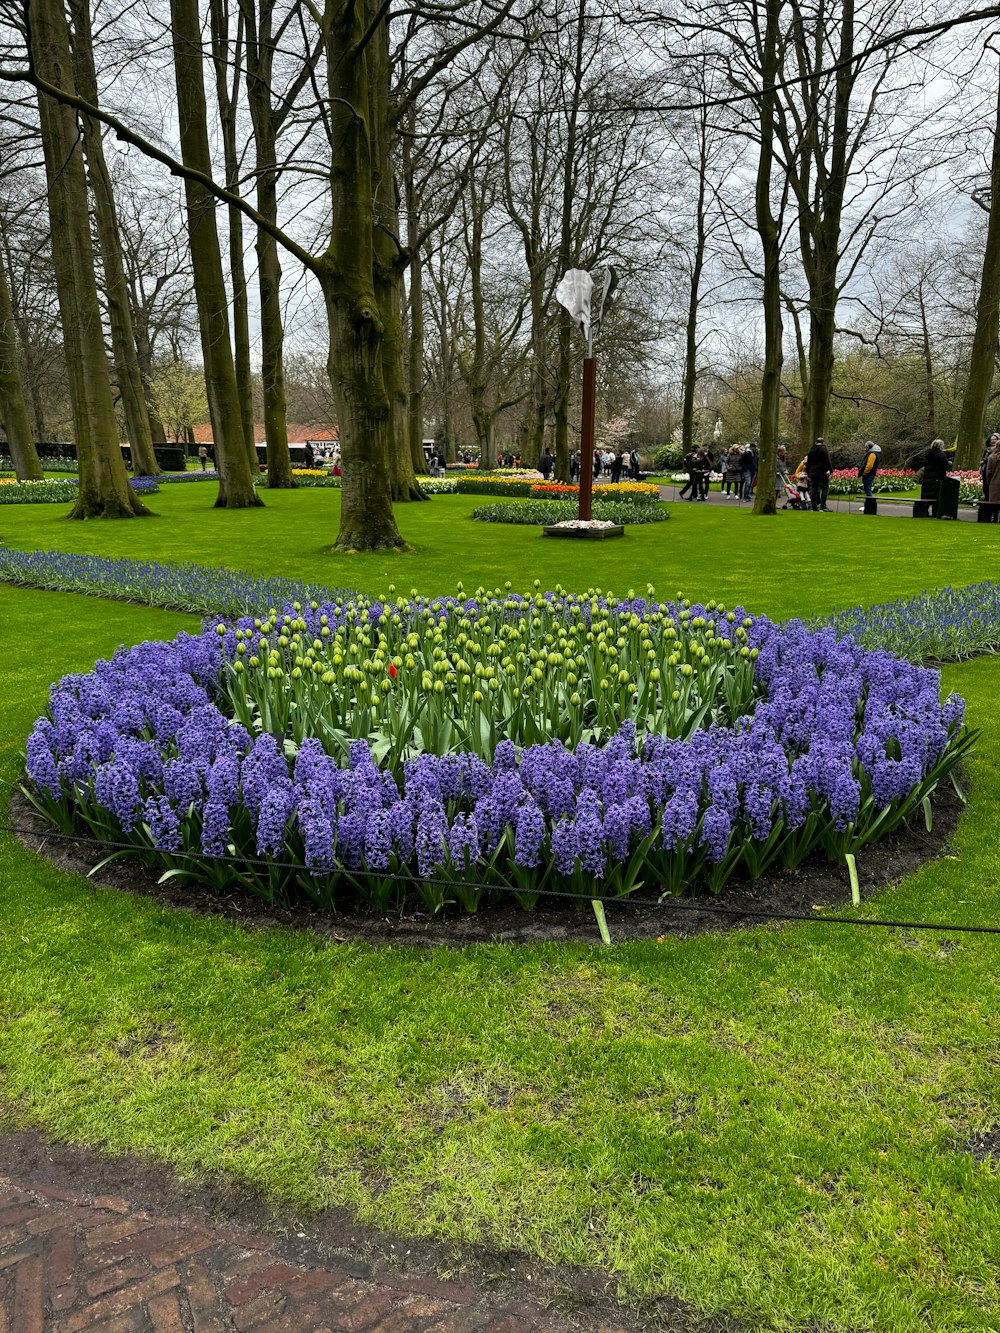 a circular flower bed in the middle of a park